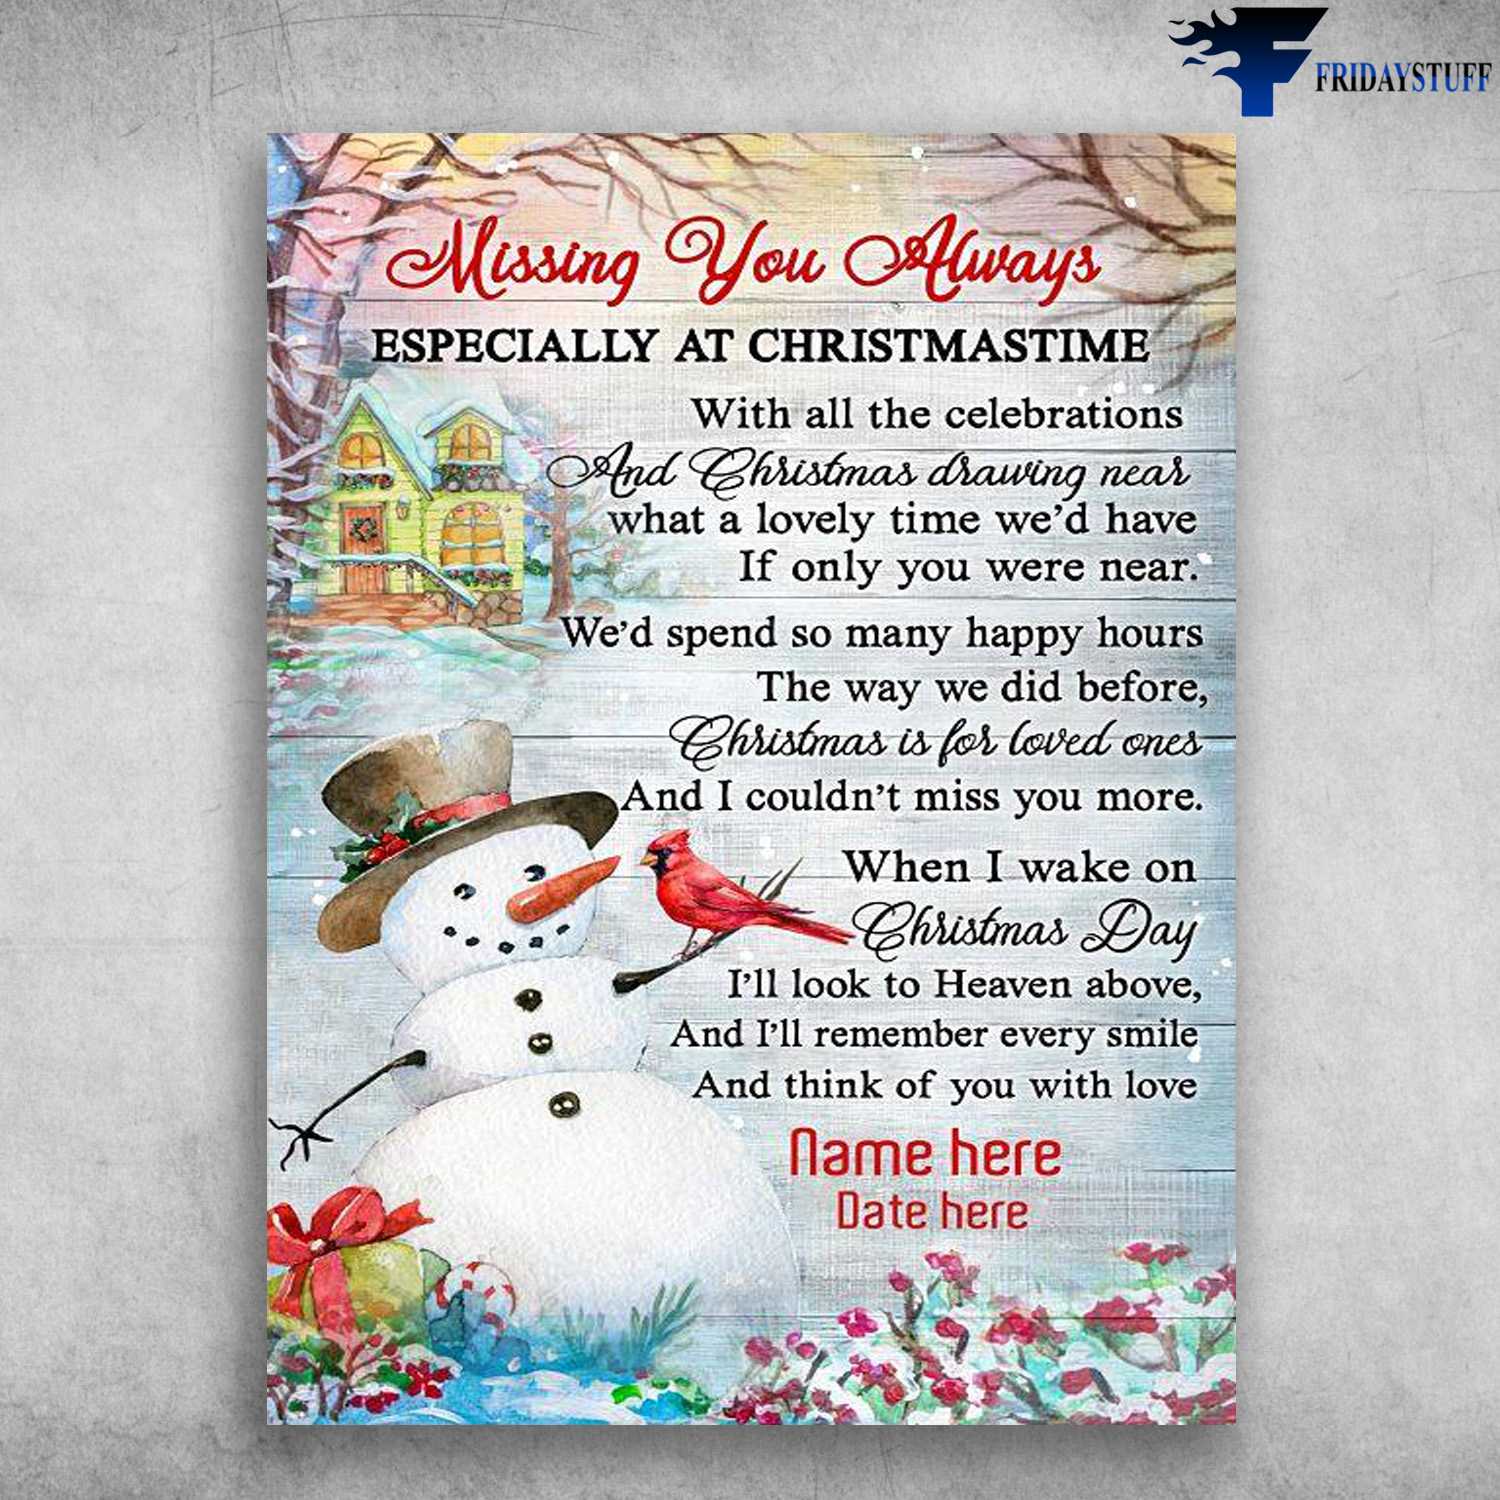 Snow Man, Cardinal Bird, Christmas Poster - Missing You Always, Especially At Christmastime, With All The Celebrations, And Christmas Drawing Near, What A Lovely Time We'd Have